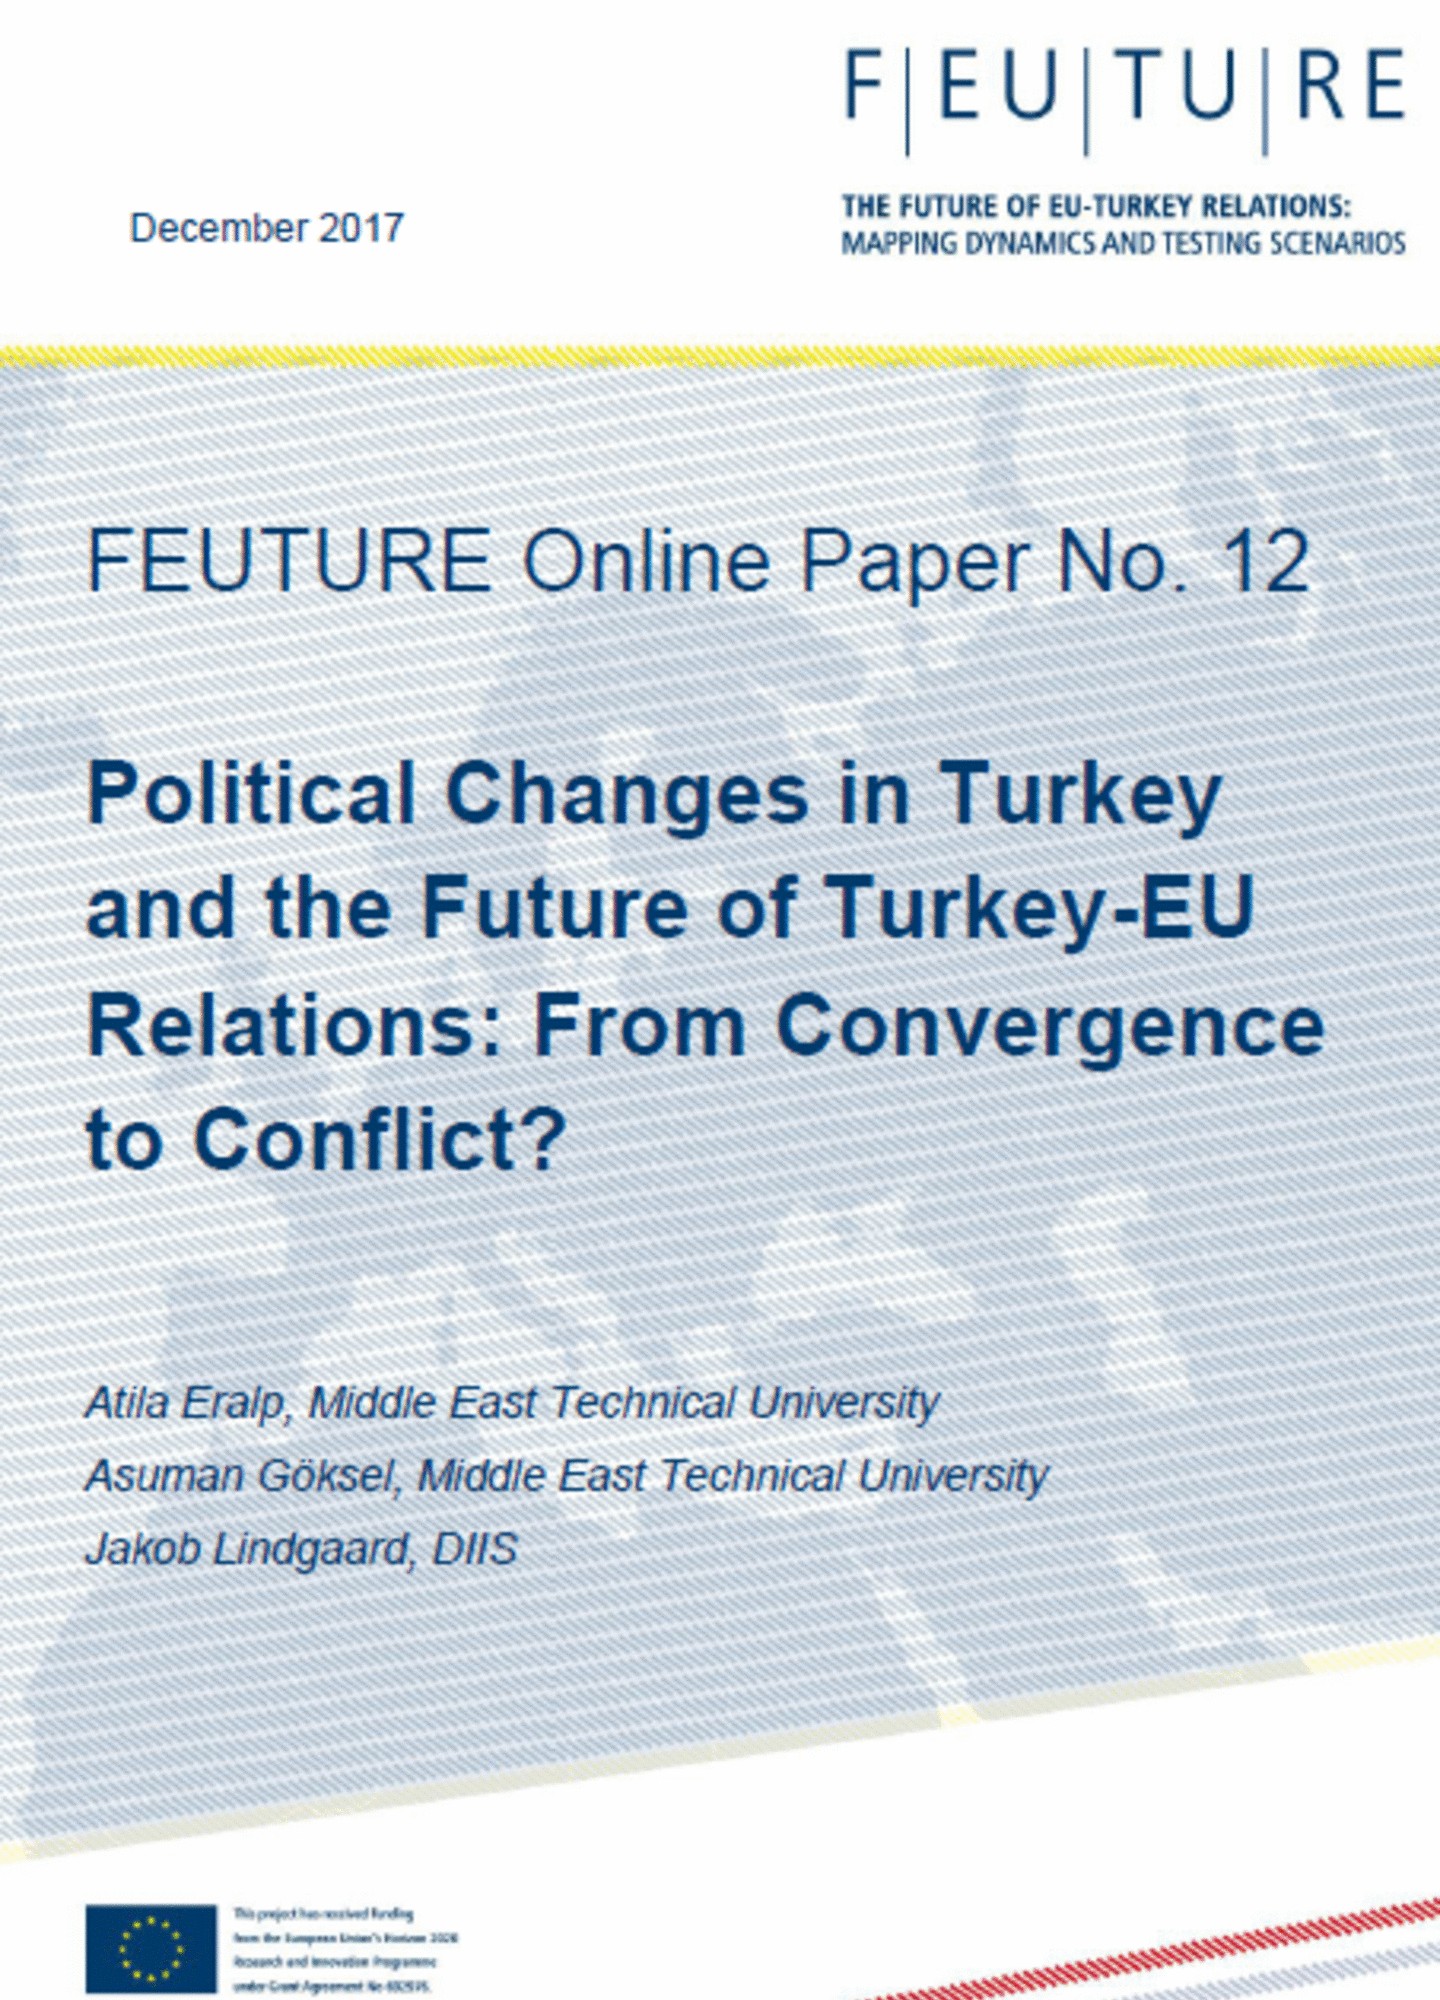 Political Changes in Turkey and the Future of Turkey-EU Relations: From Convergence to Conflict?